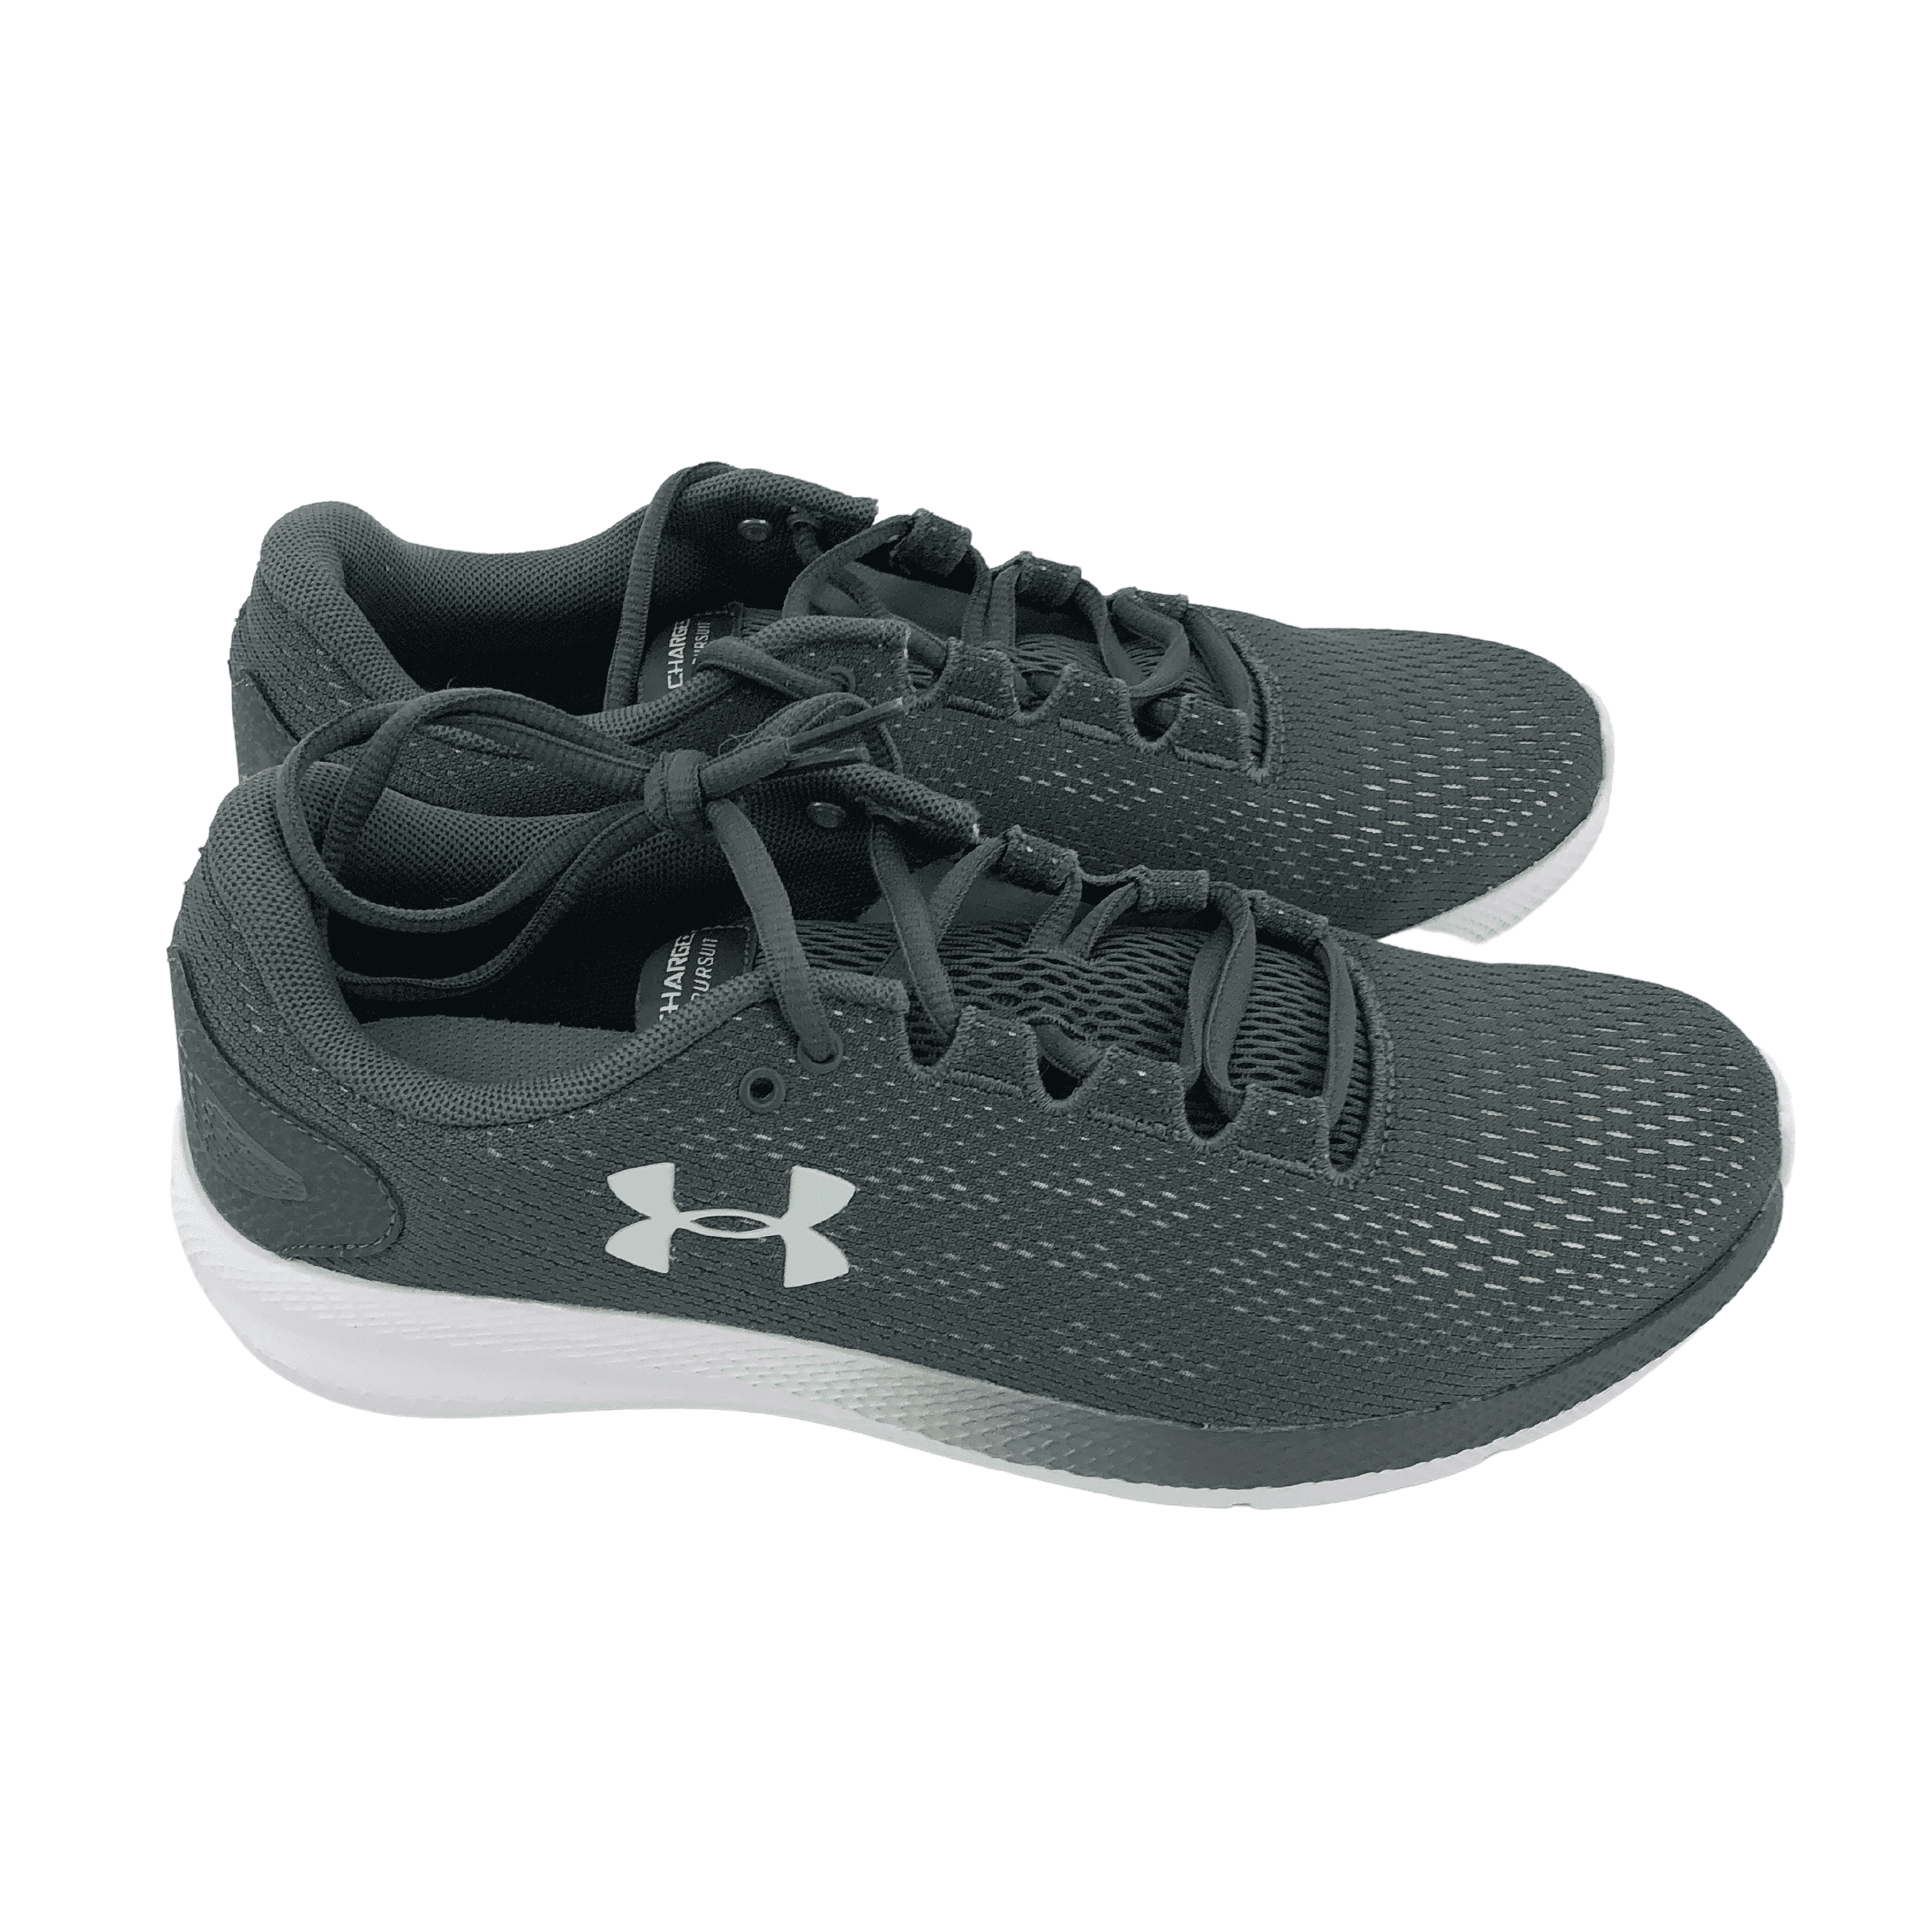 Under Armour Women's Running Shoe's / Charged Pursuit 2 / Size 9 / Grey